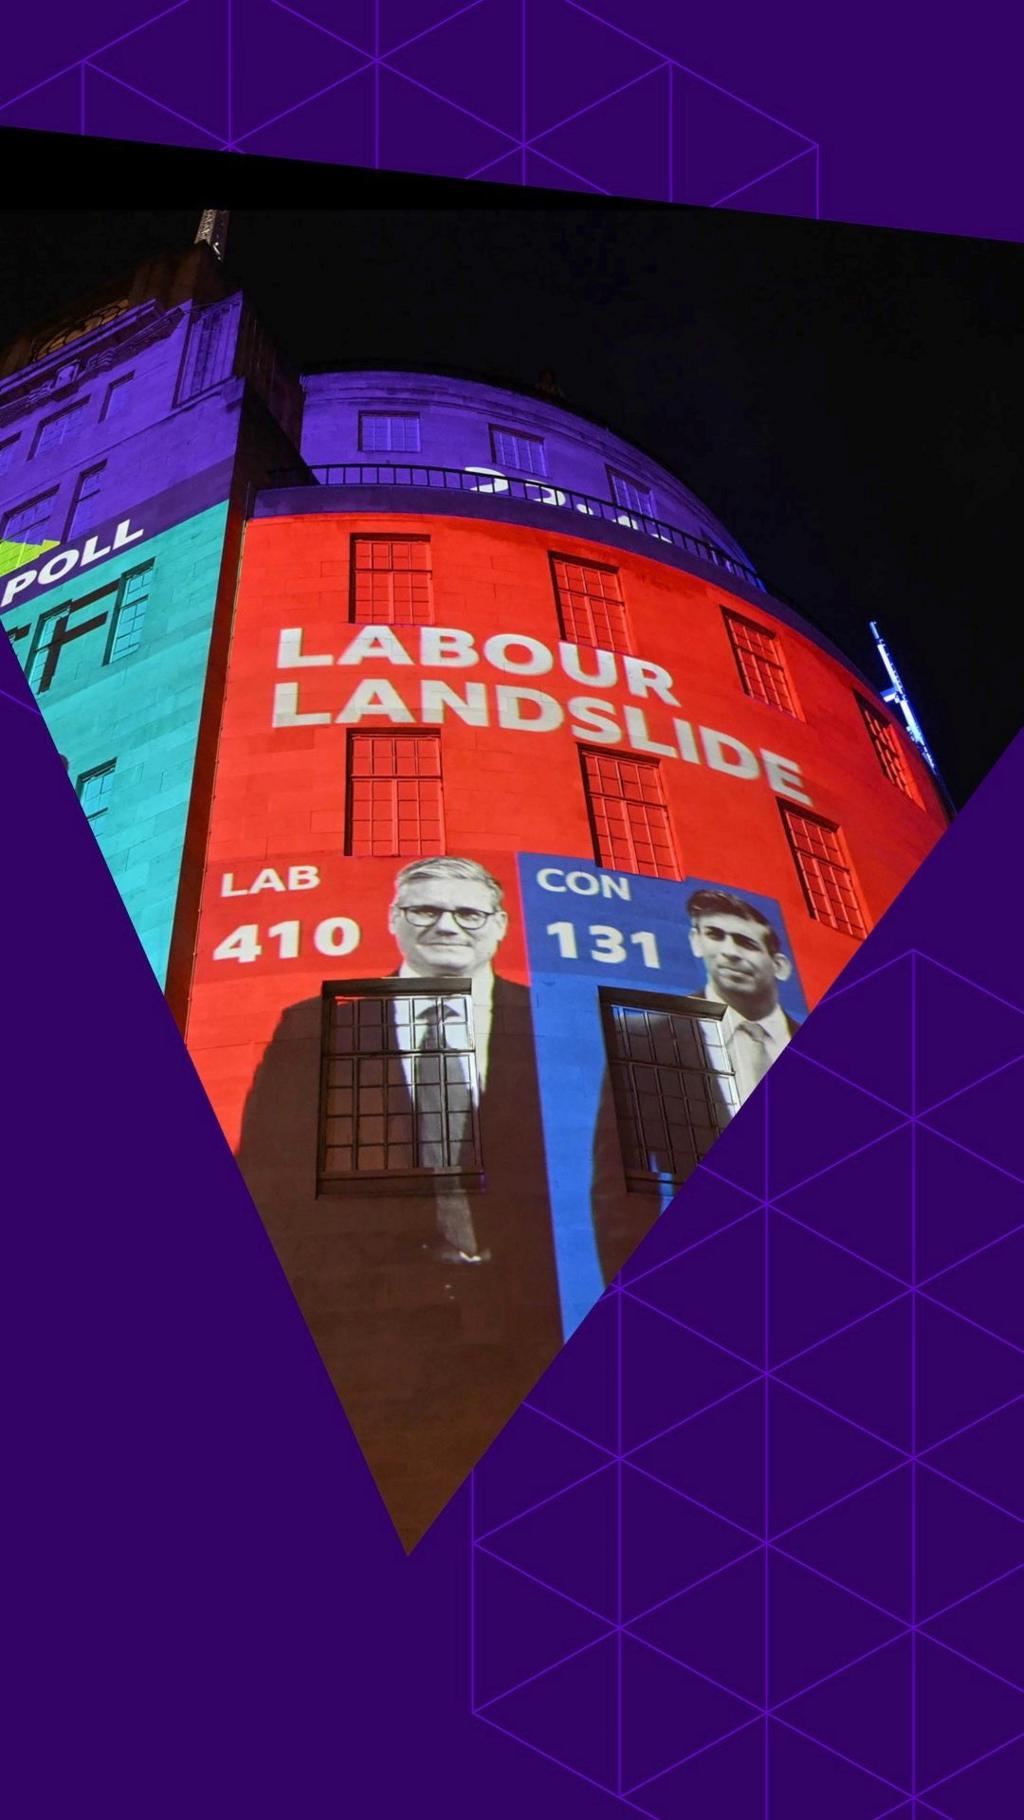 Exit poll result projection on London Broadcasting House - the words 'Labour landslide' on a red background